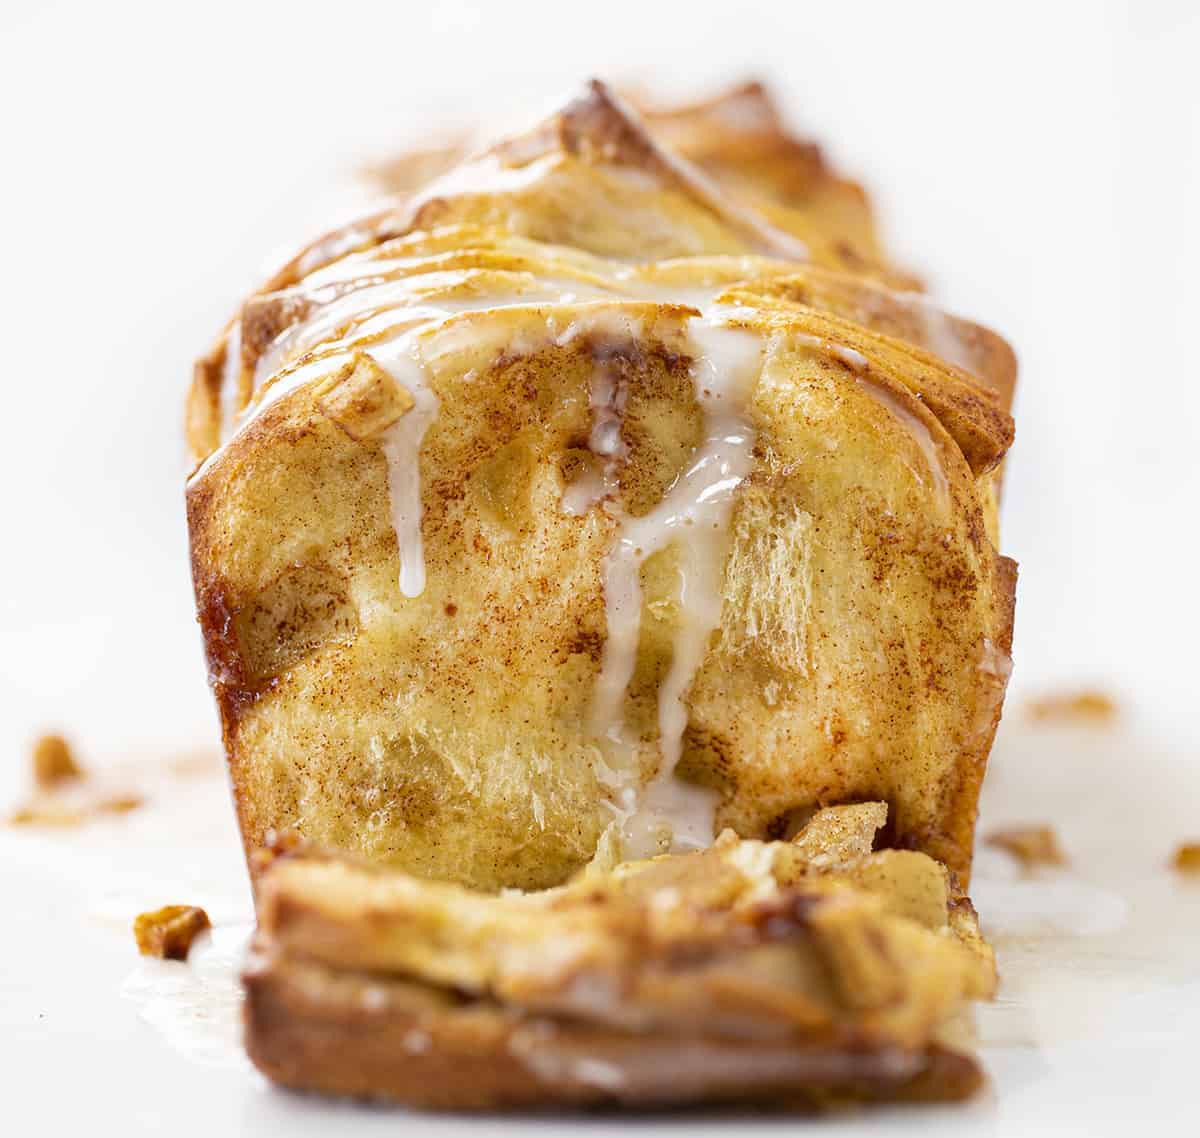 Apple Pull Apart Bread with One Piece Laying Down to Show Inside Texture